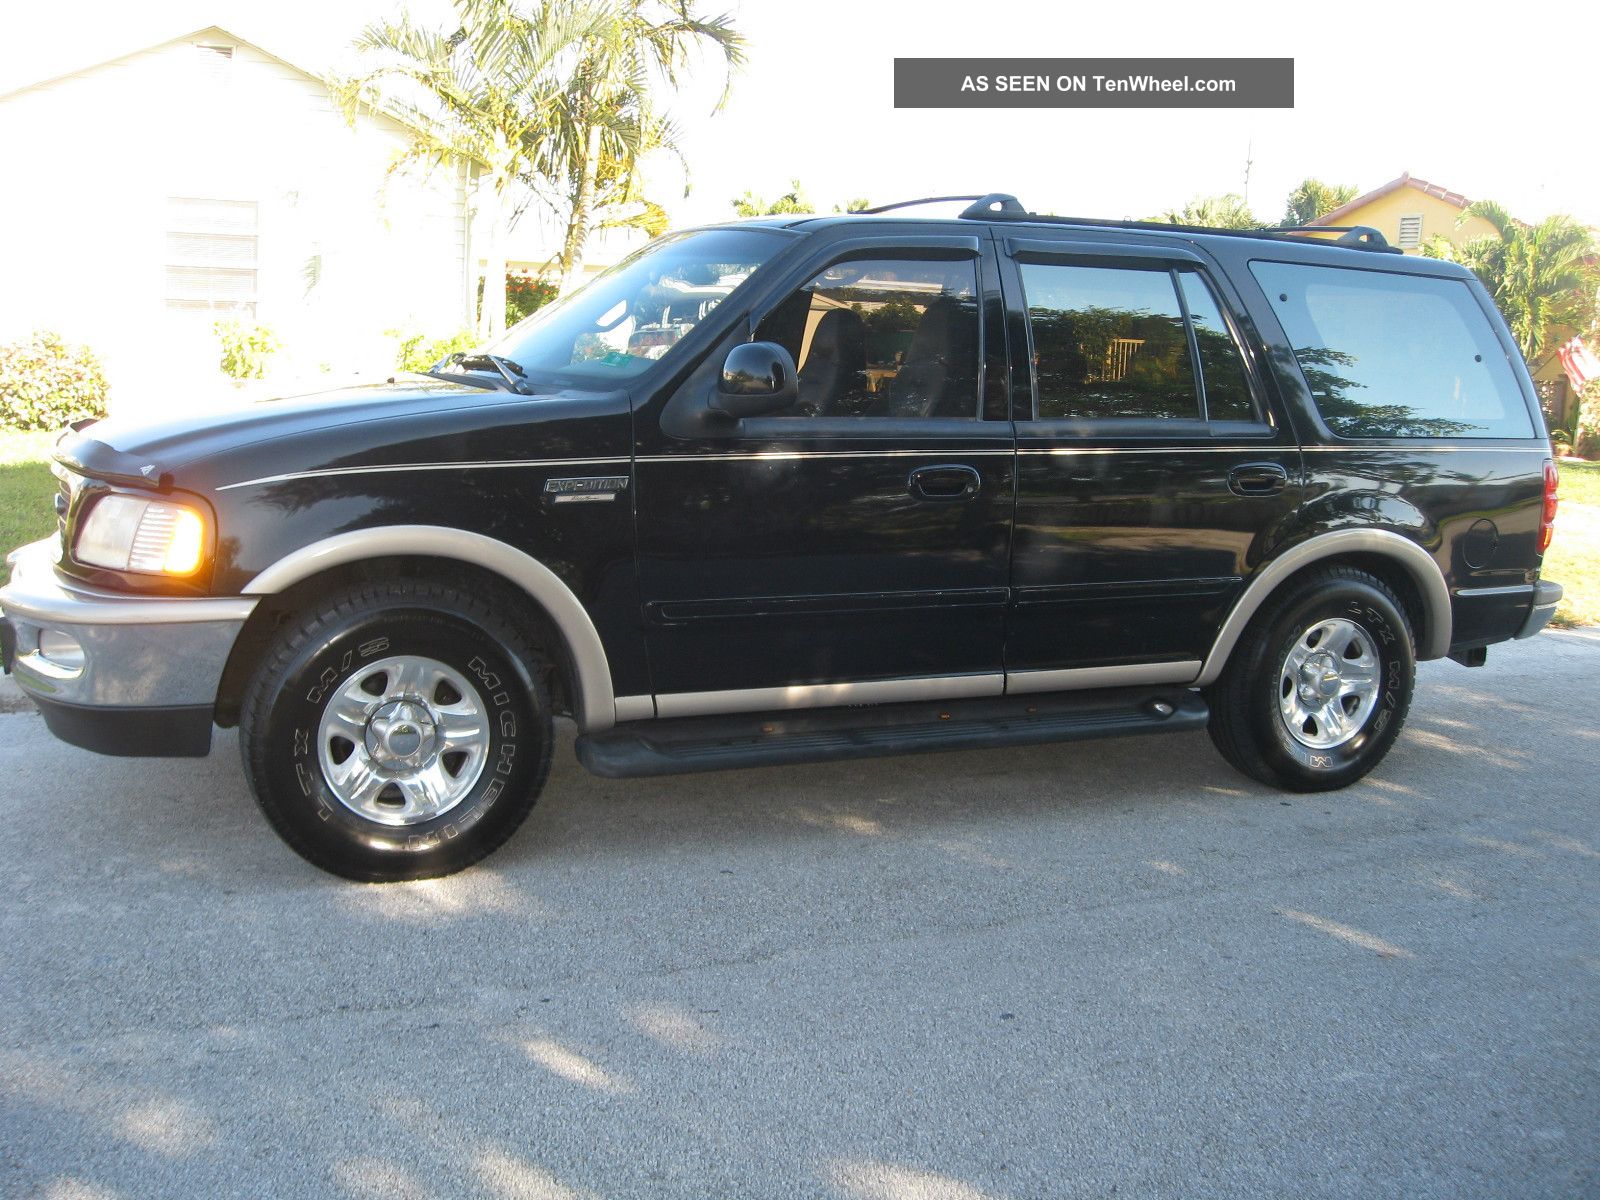 1997 Ford expedition gross weight #3